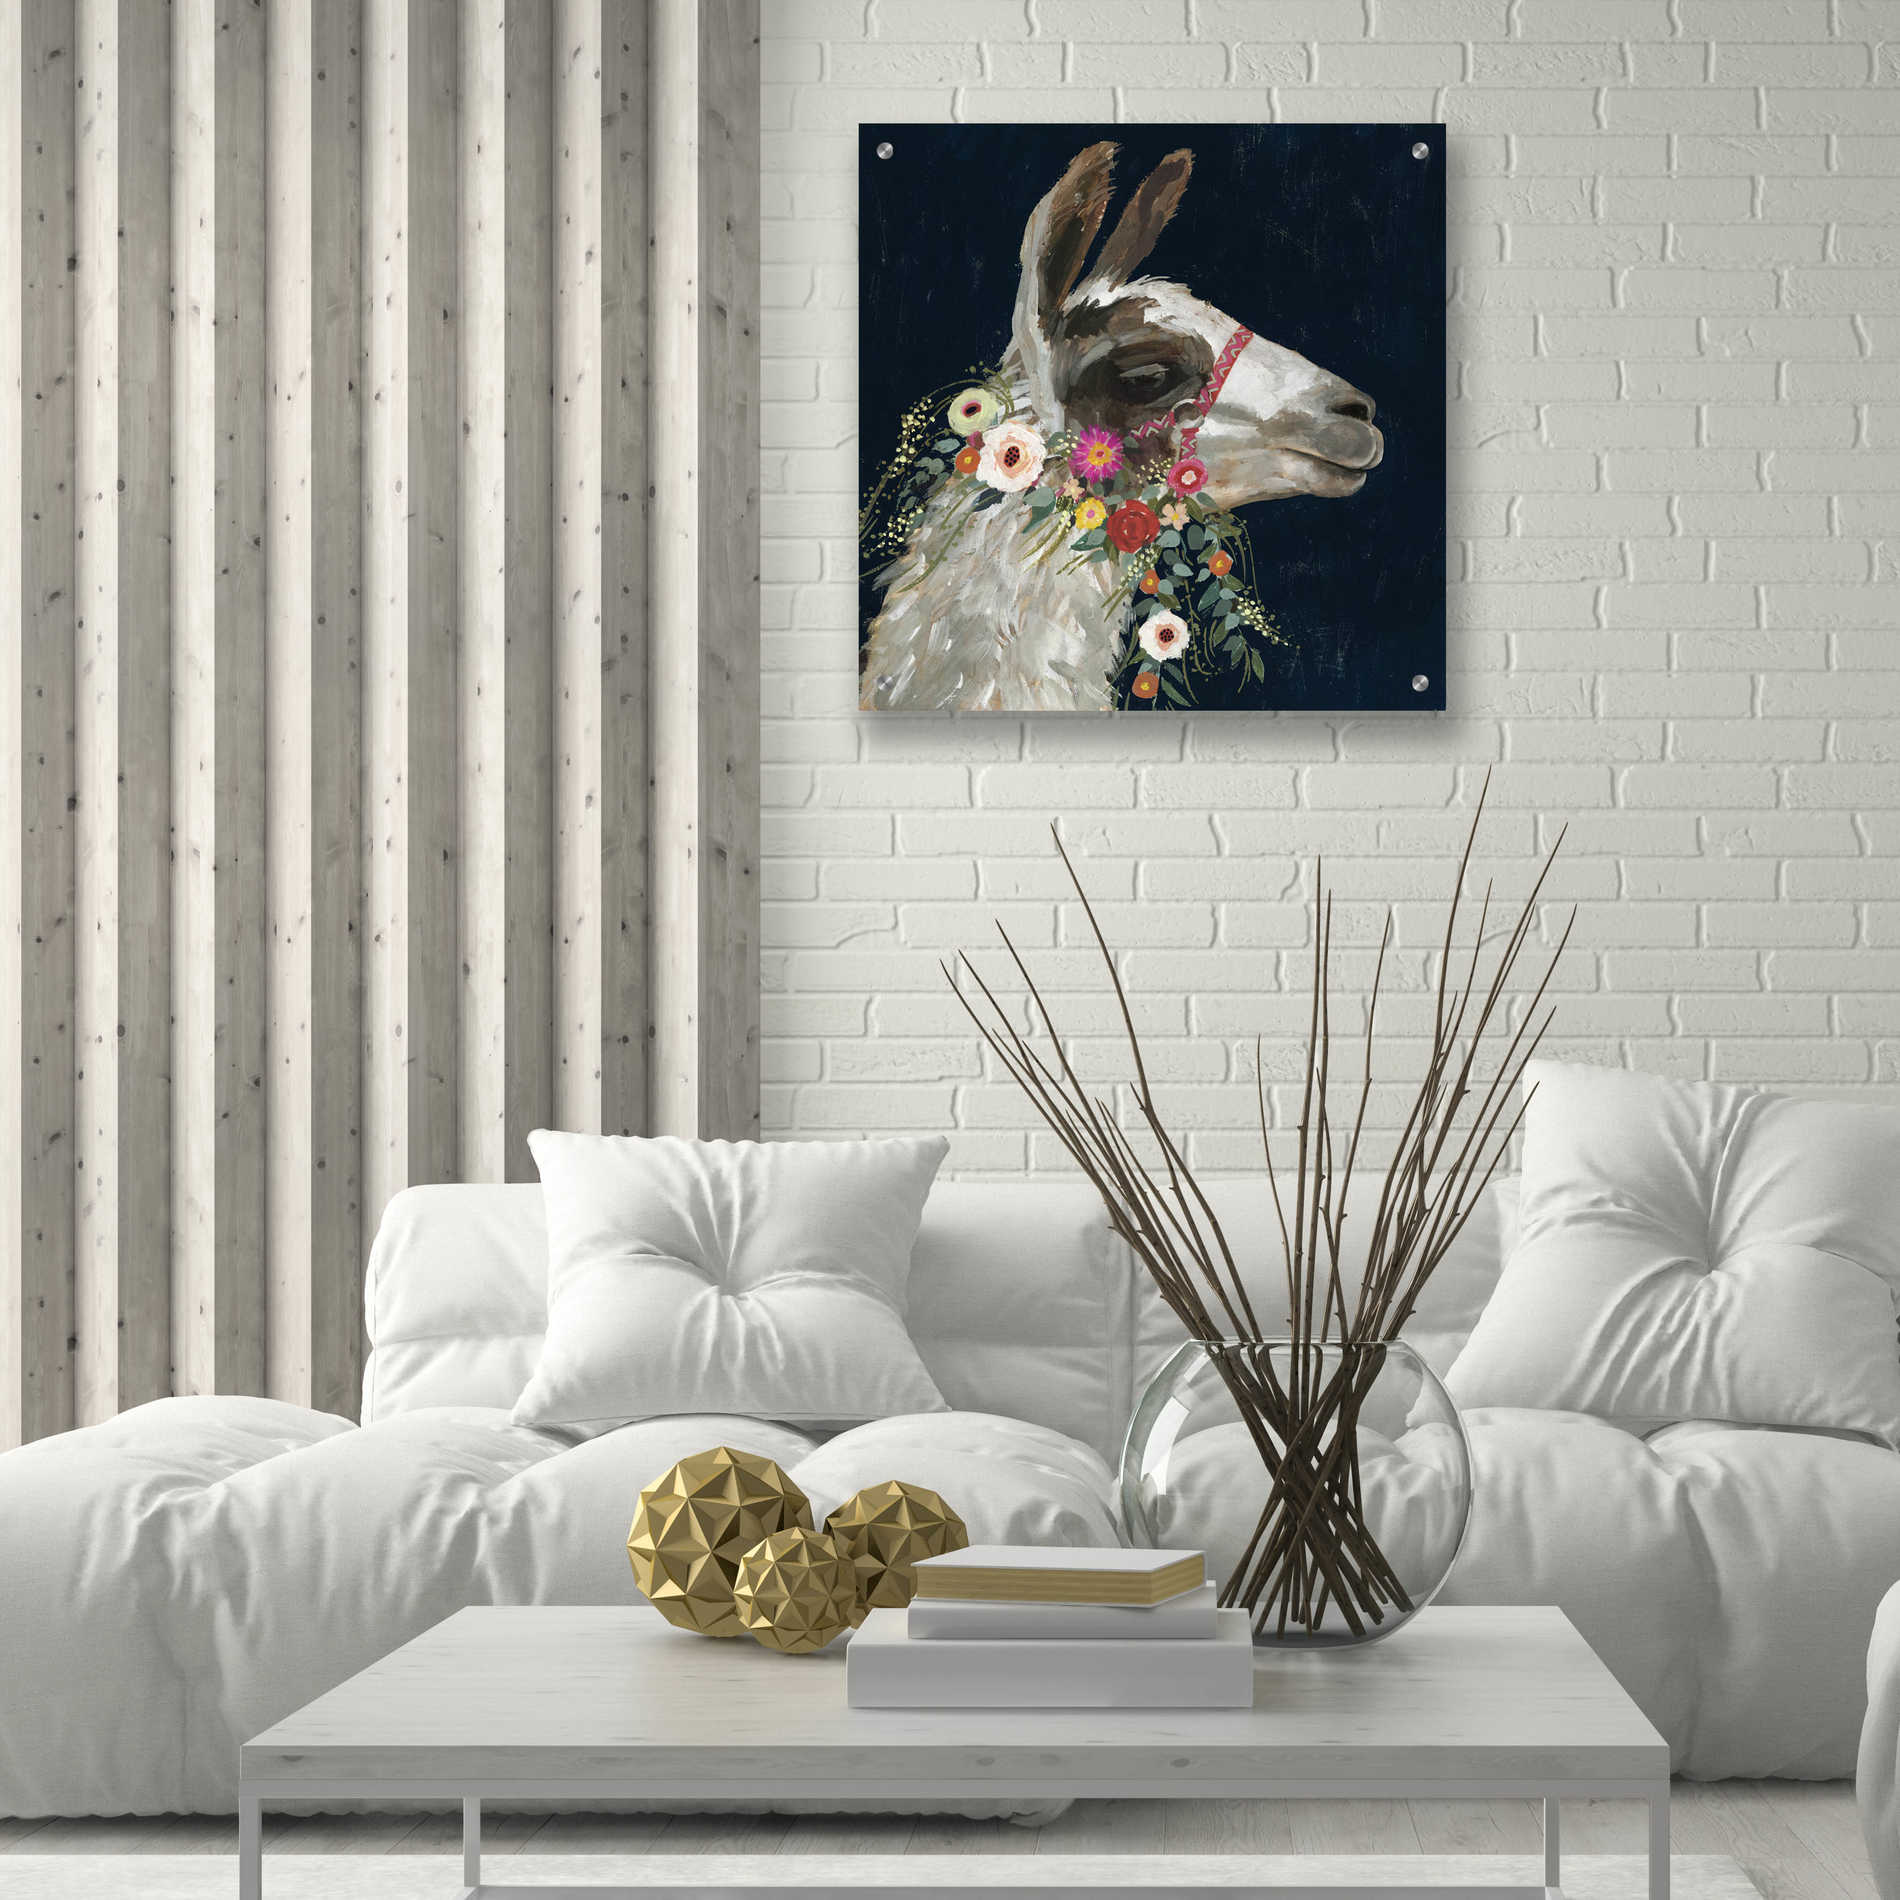 Epic Art 'Lovely Llama I' by Victoria Borges, Acrylic Glass Wall Art,24x24